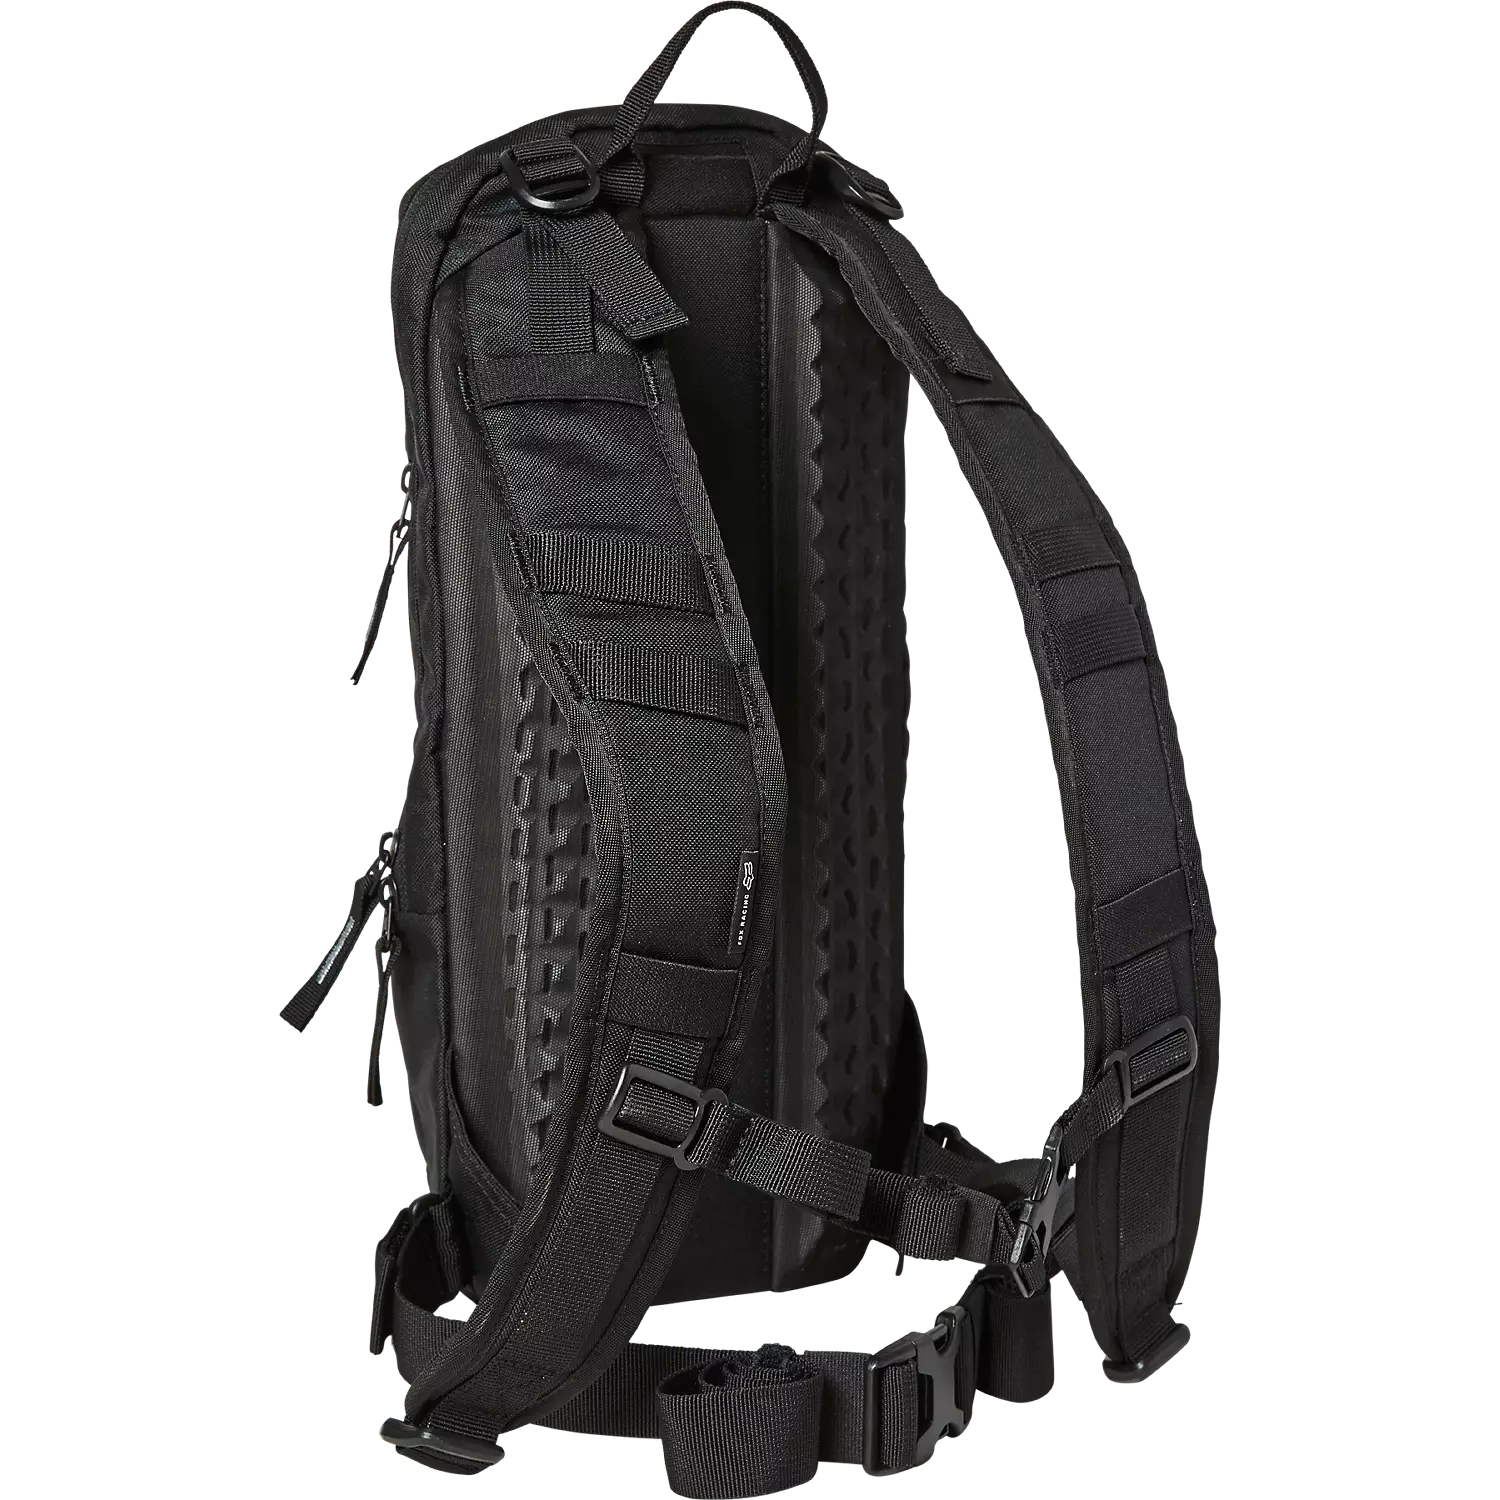 UTILITY 6L HYDRATION PACK SMALL BLACK